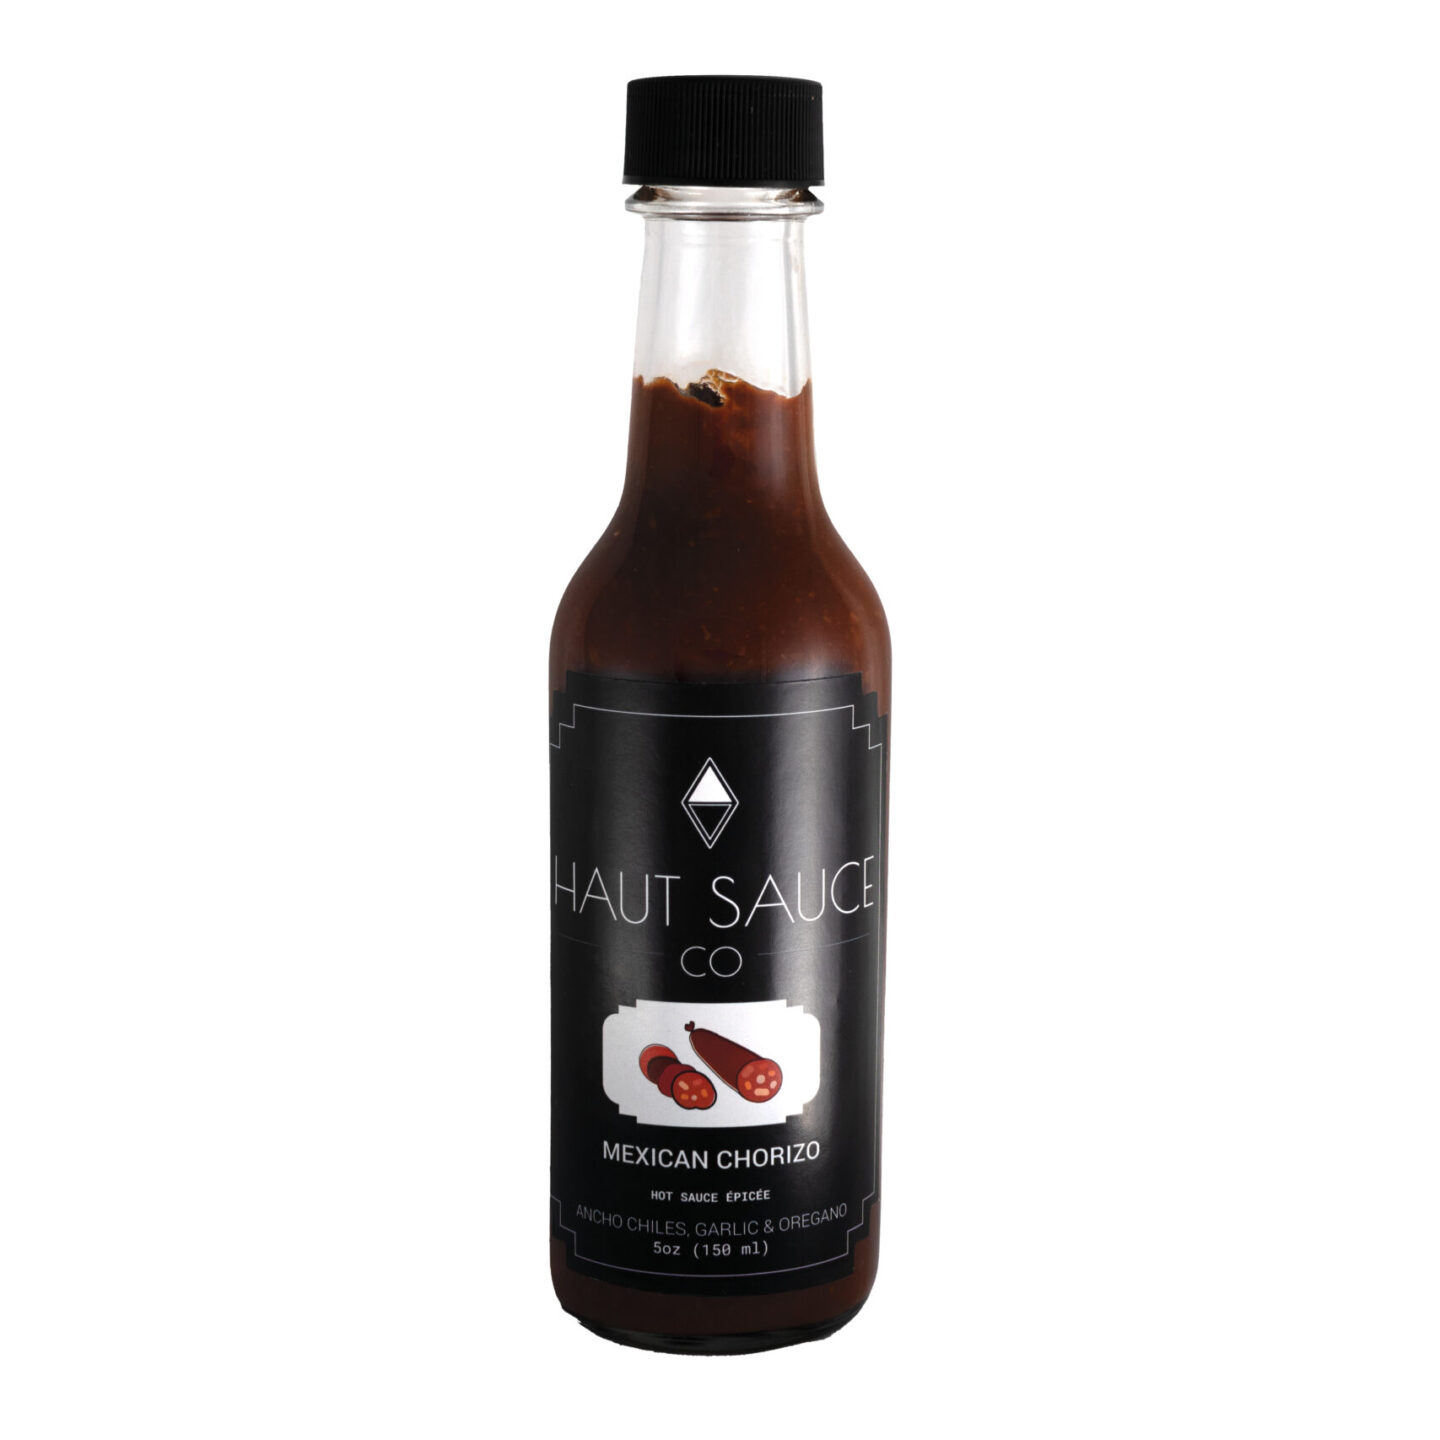 Front label view of Mexican Chorizo sauce by haut sauce co. Ancho Chiles, Garlic & oregano. 5 ounces.